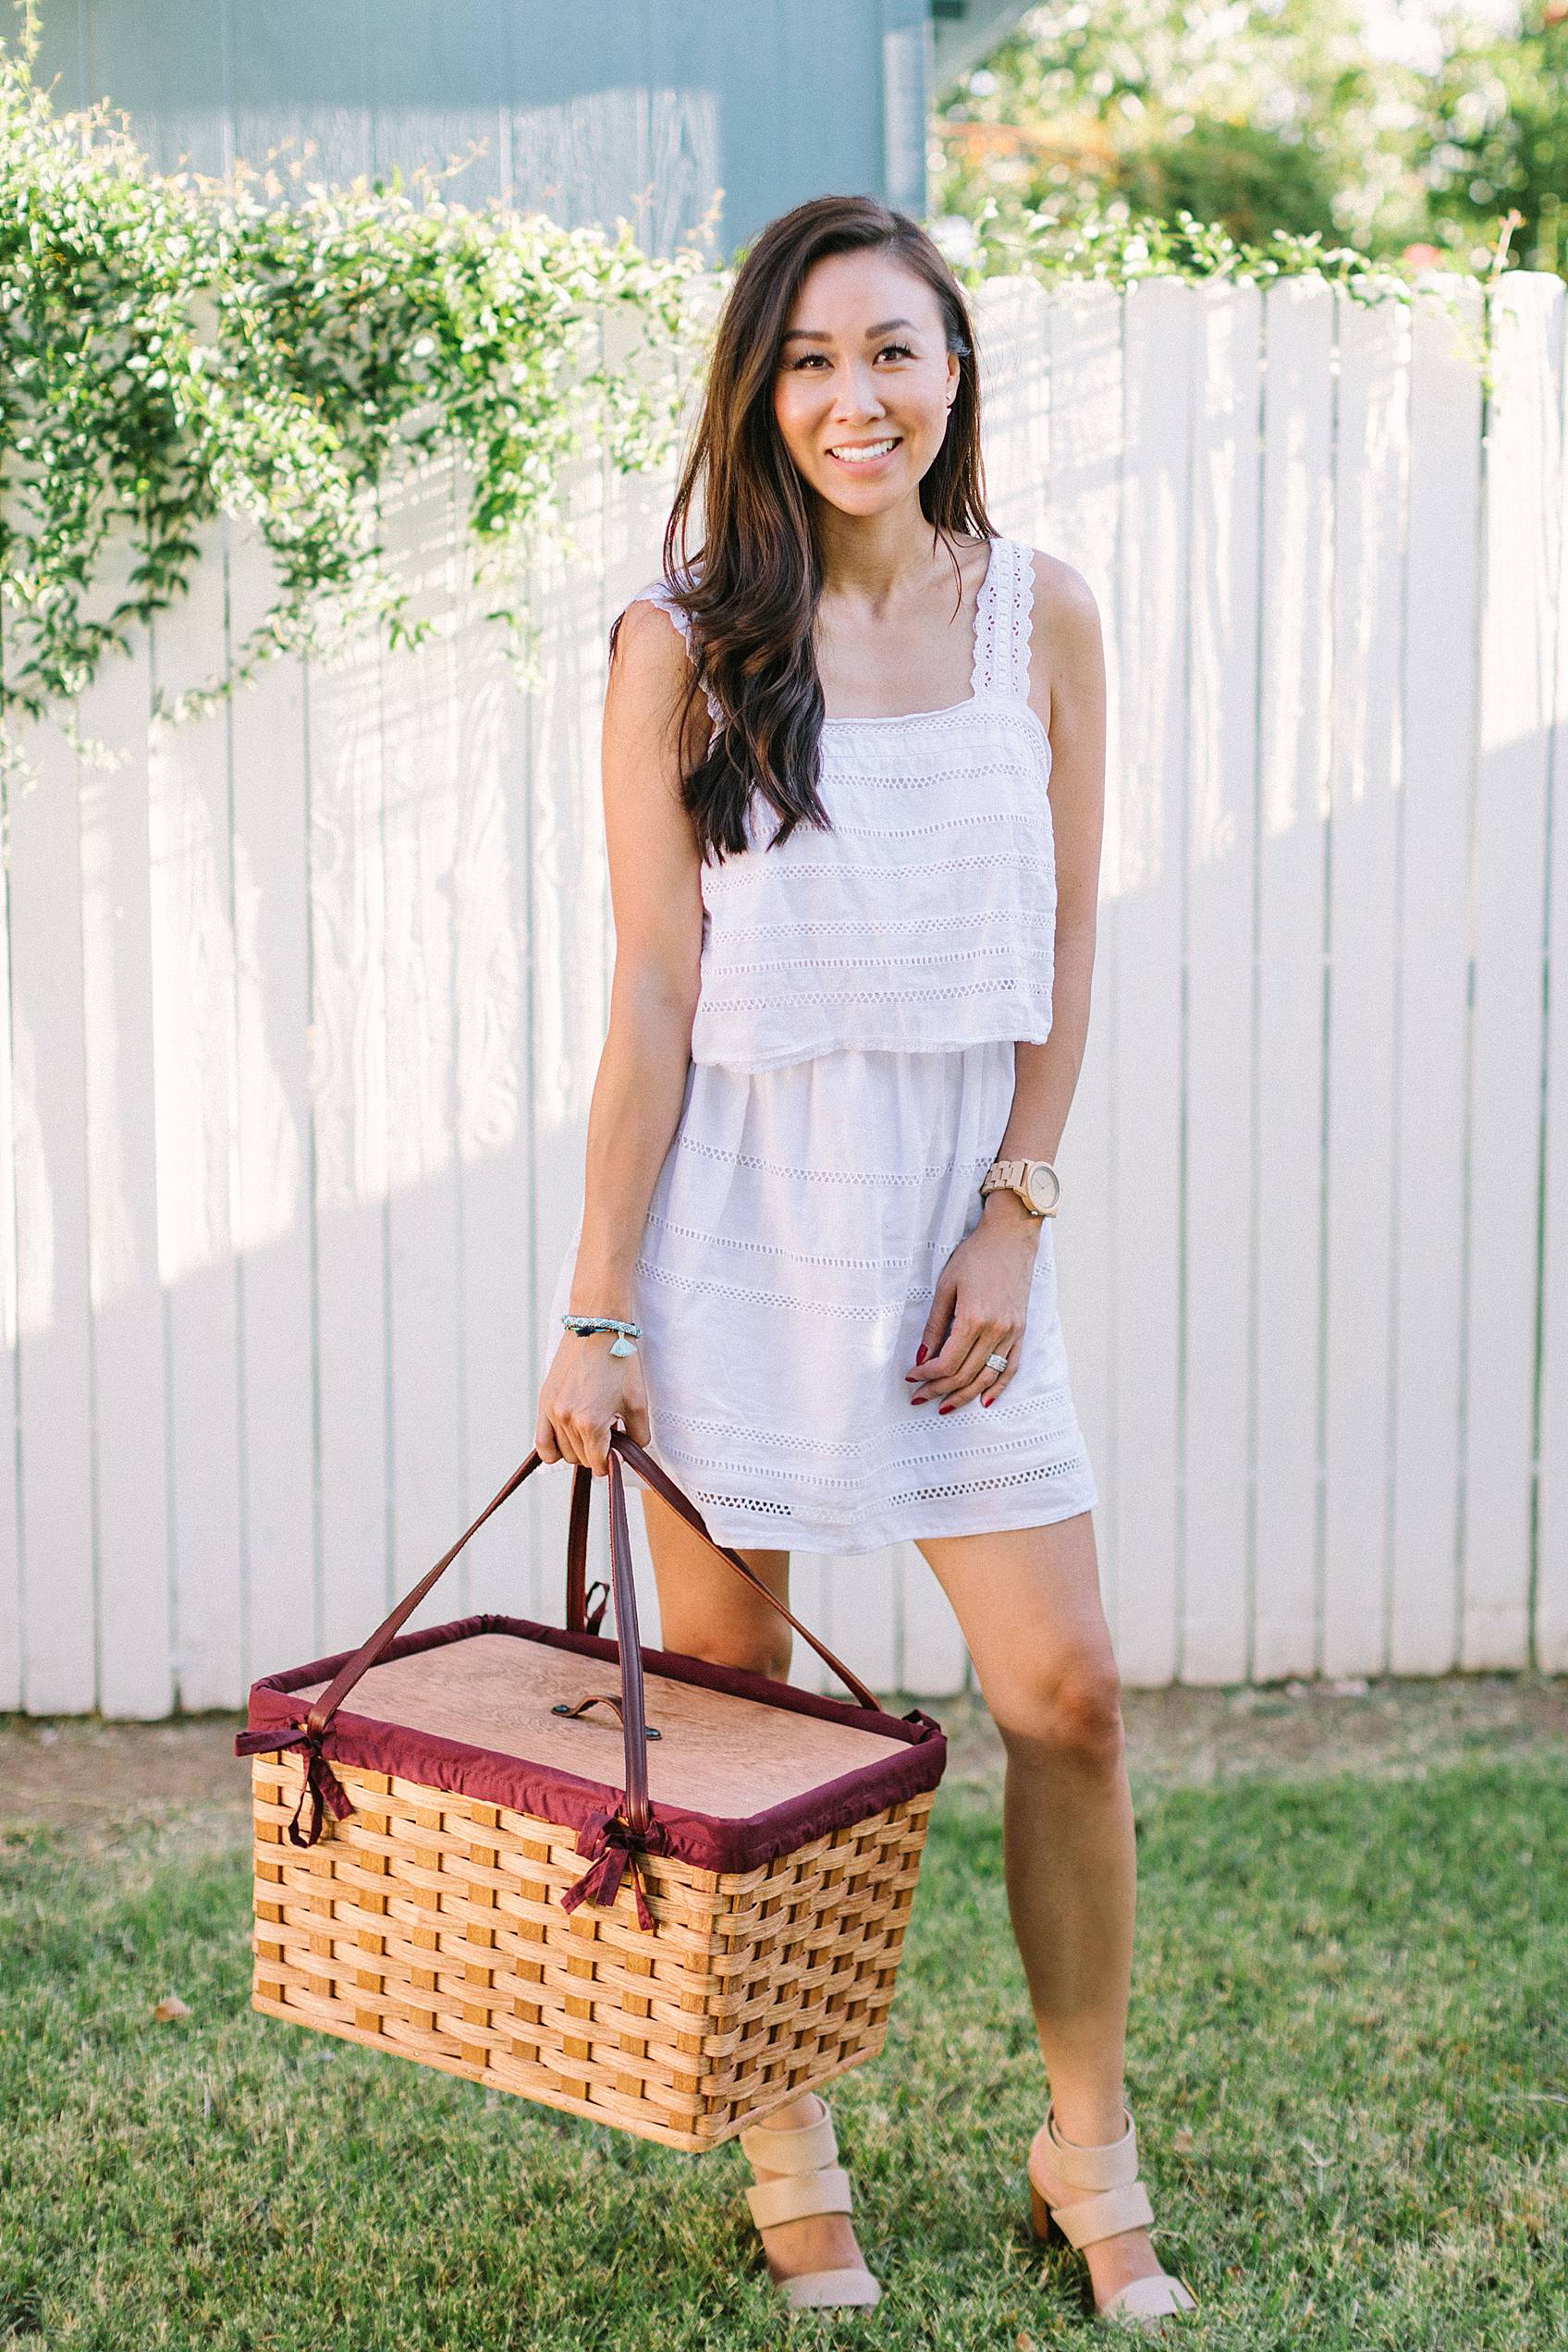 lifestyle blogger diana Elizabeth holding an amish made picnic basket in white dress infront of white fence standing on grass